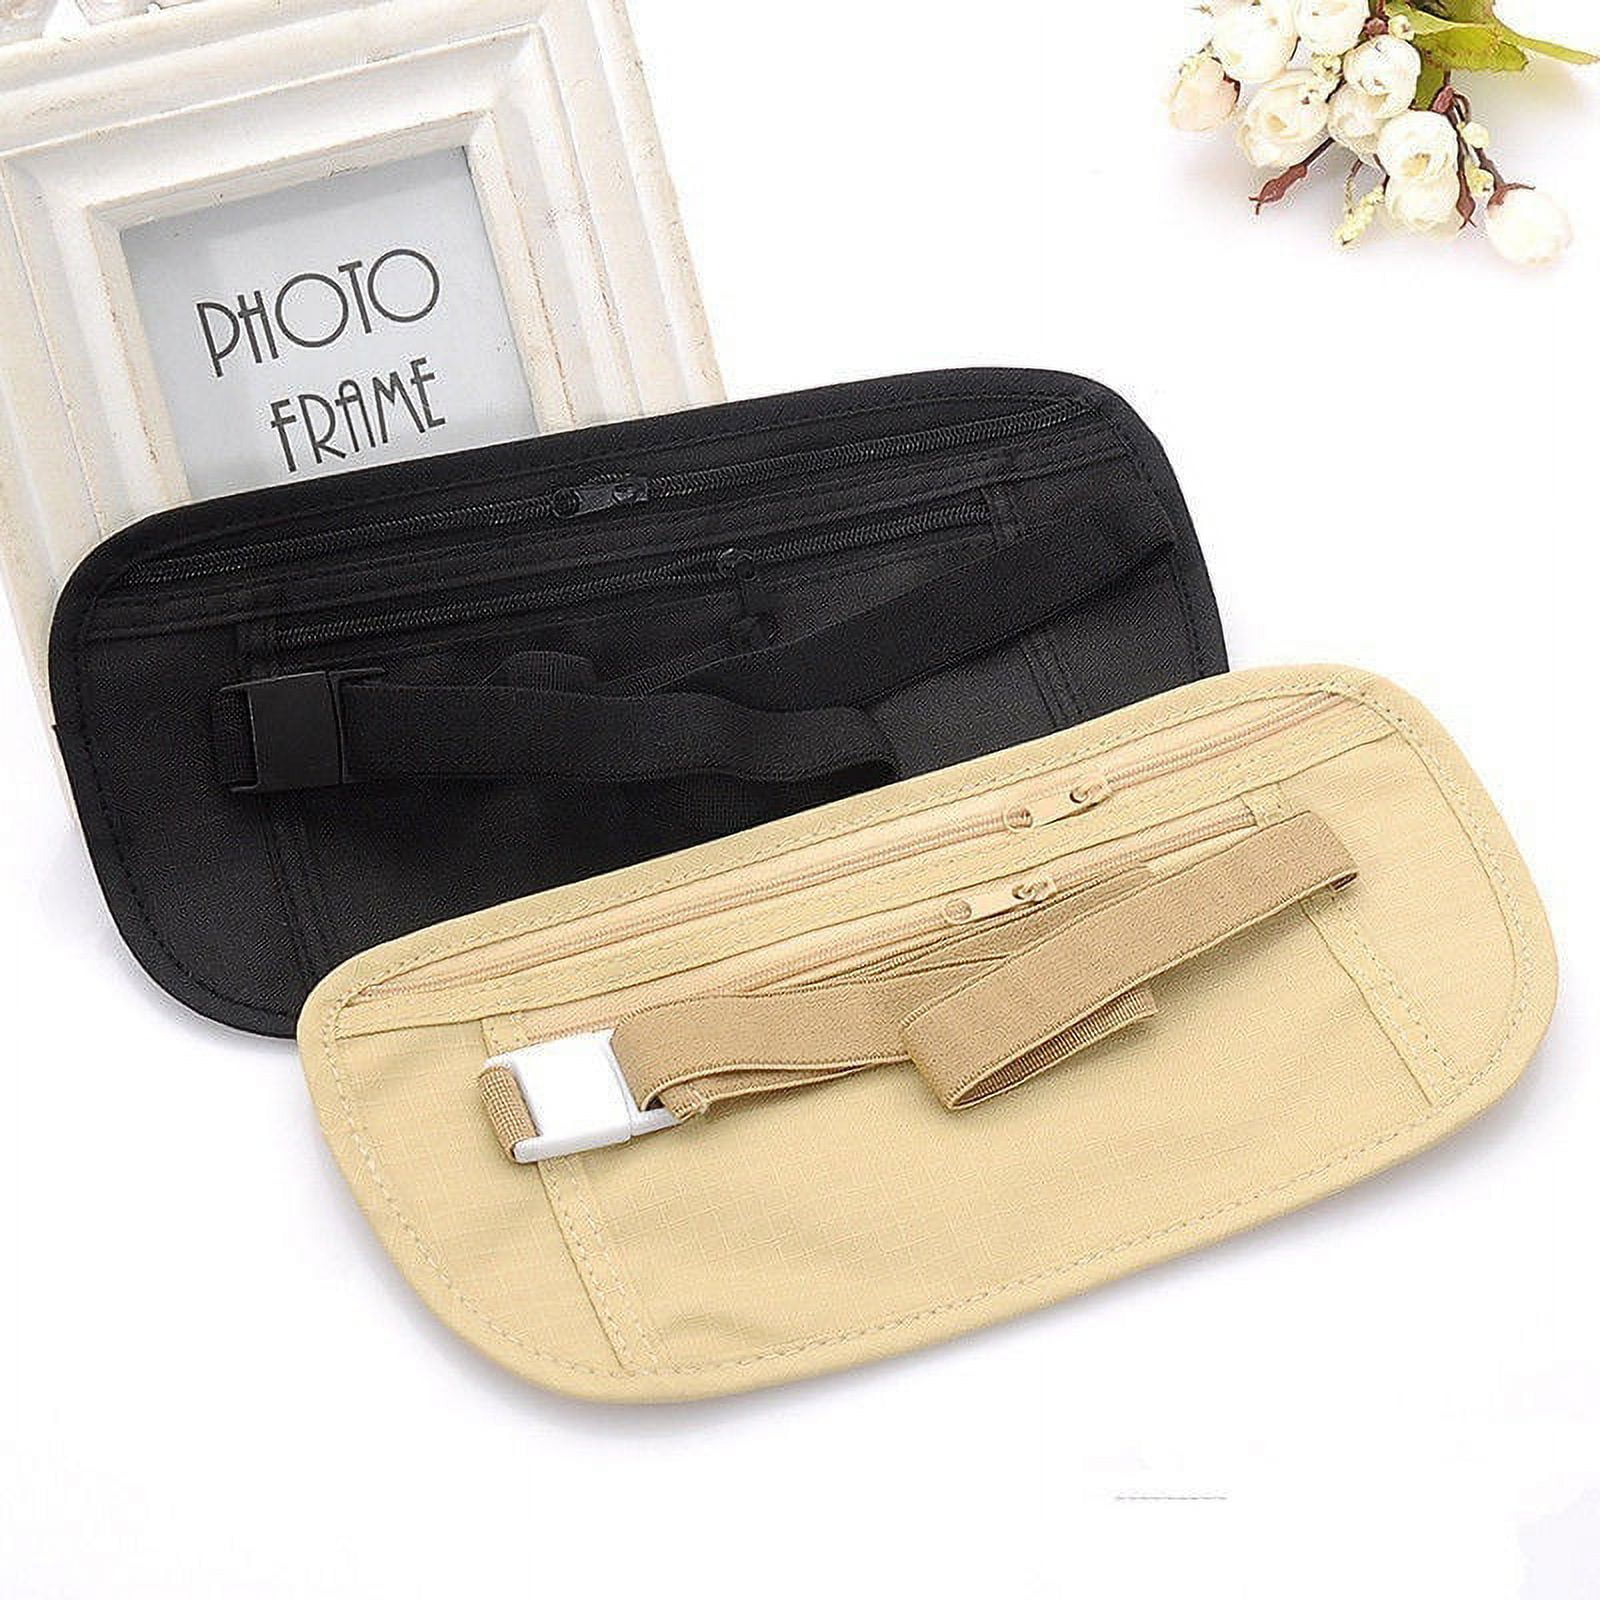 Strong Quality Waist Pack/Bum Bag/Travel Pack/Festival Money Belt  Pouch/Holiday Wallet Belt Max to 120 cm